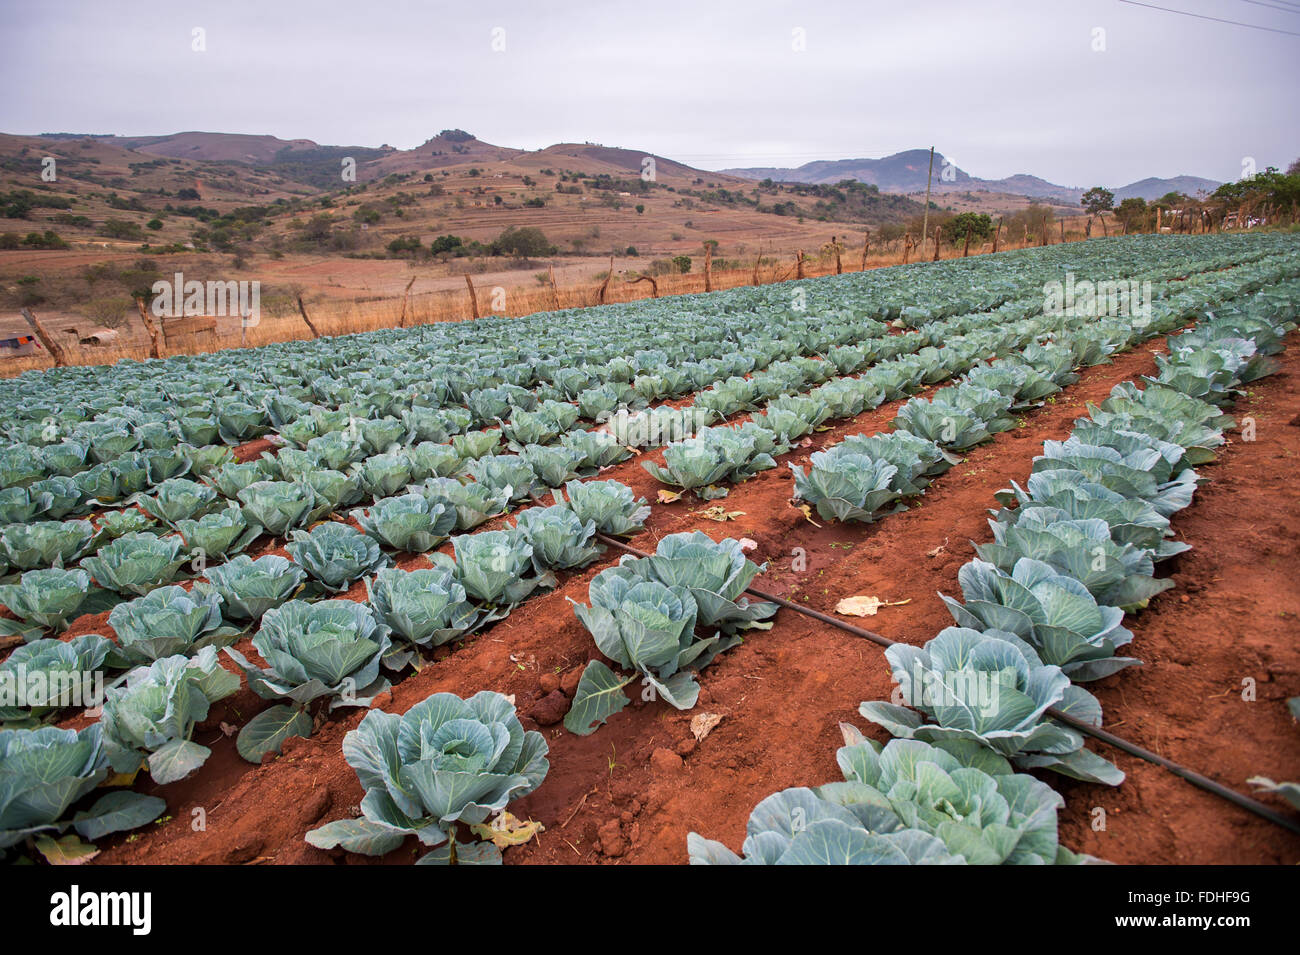 Cabbage patch in the Hhohho region of Swaziland, Africa. Stock Photo